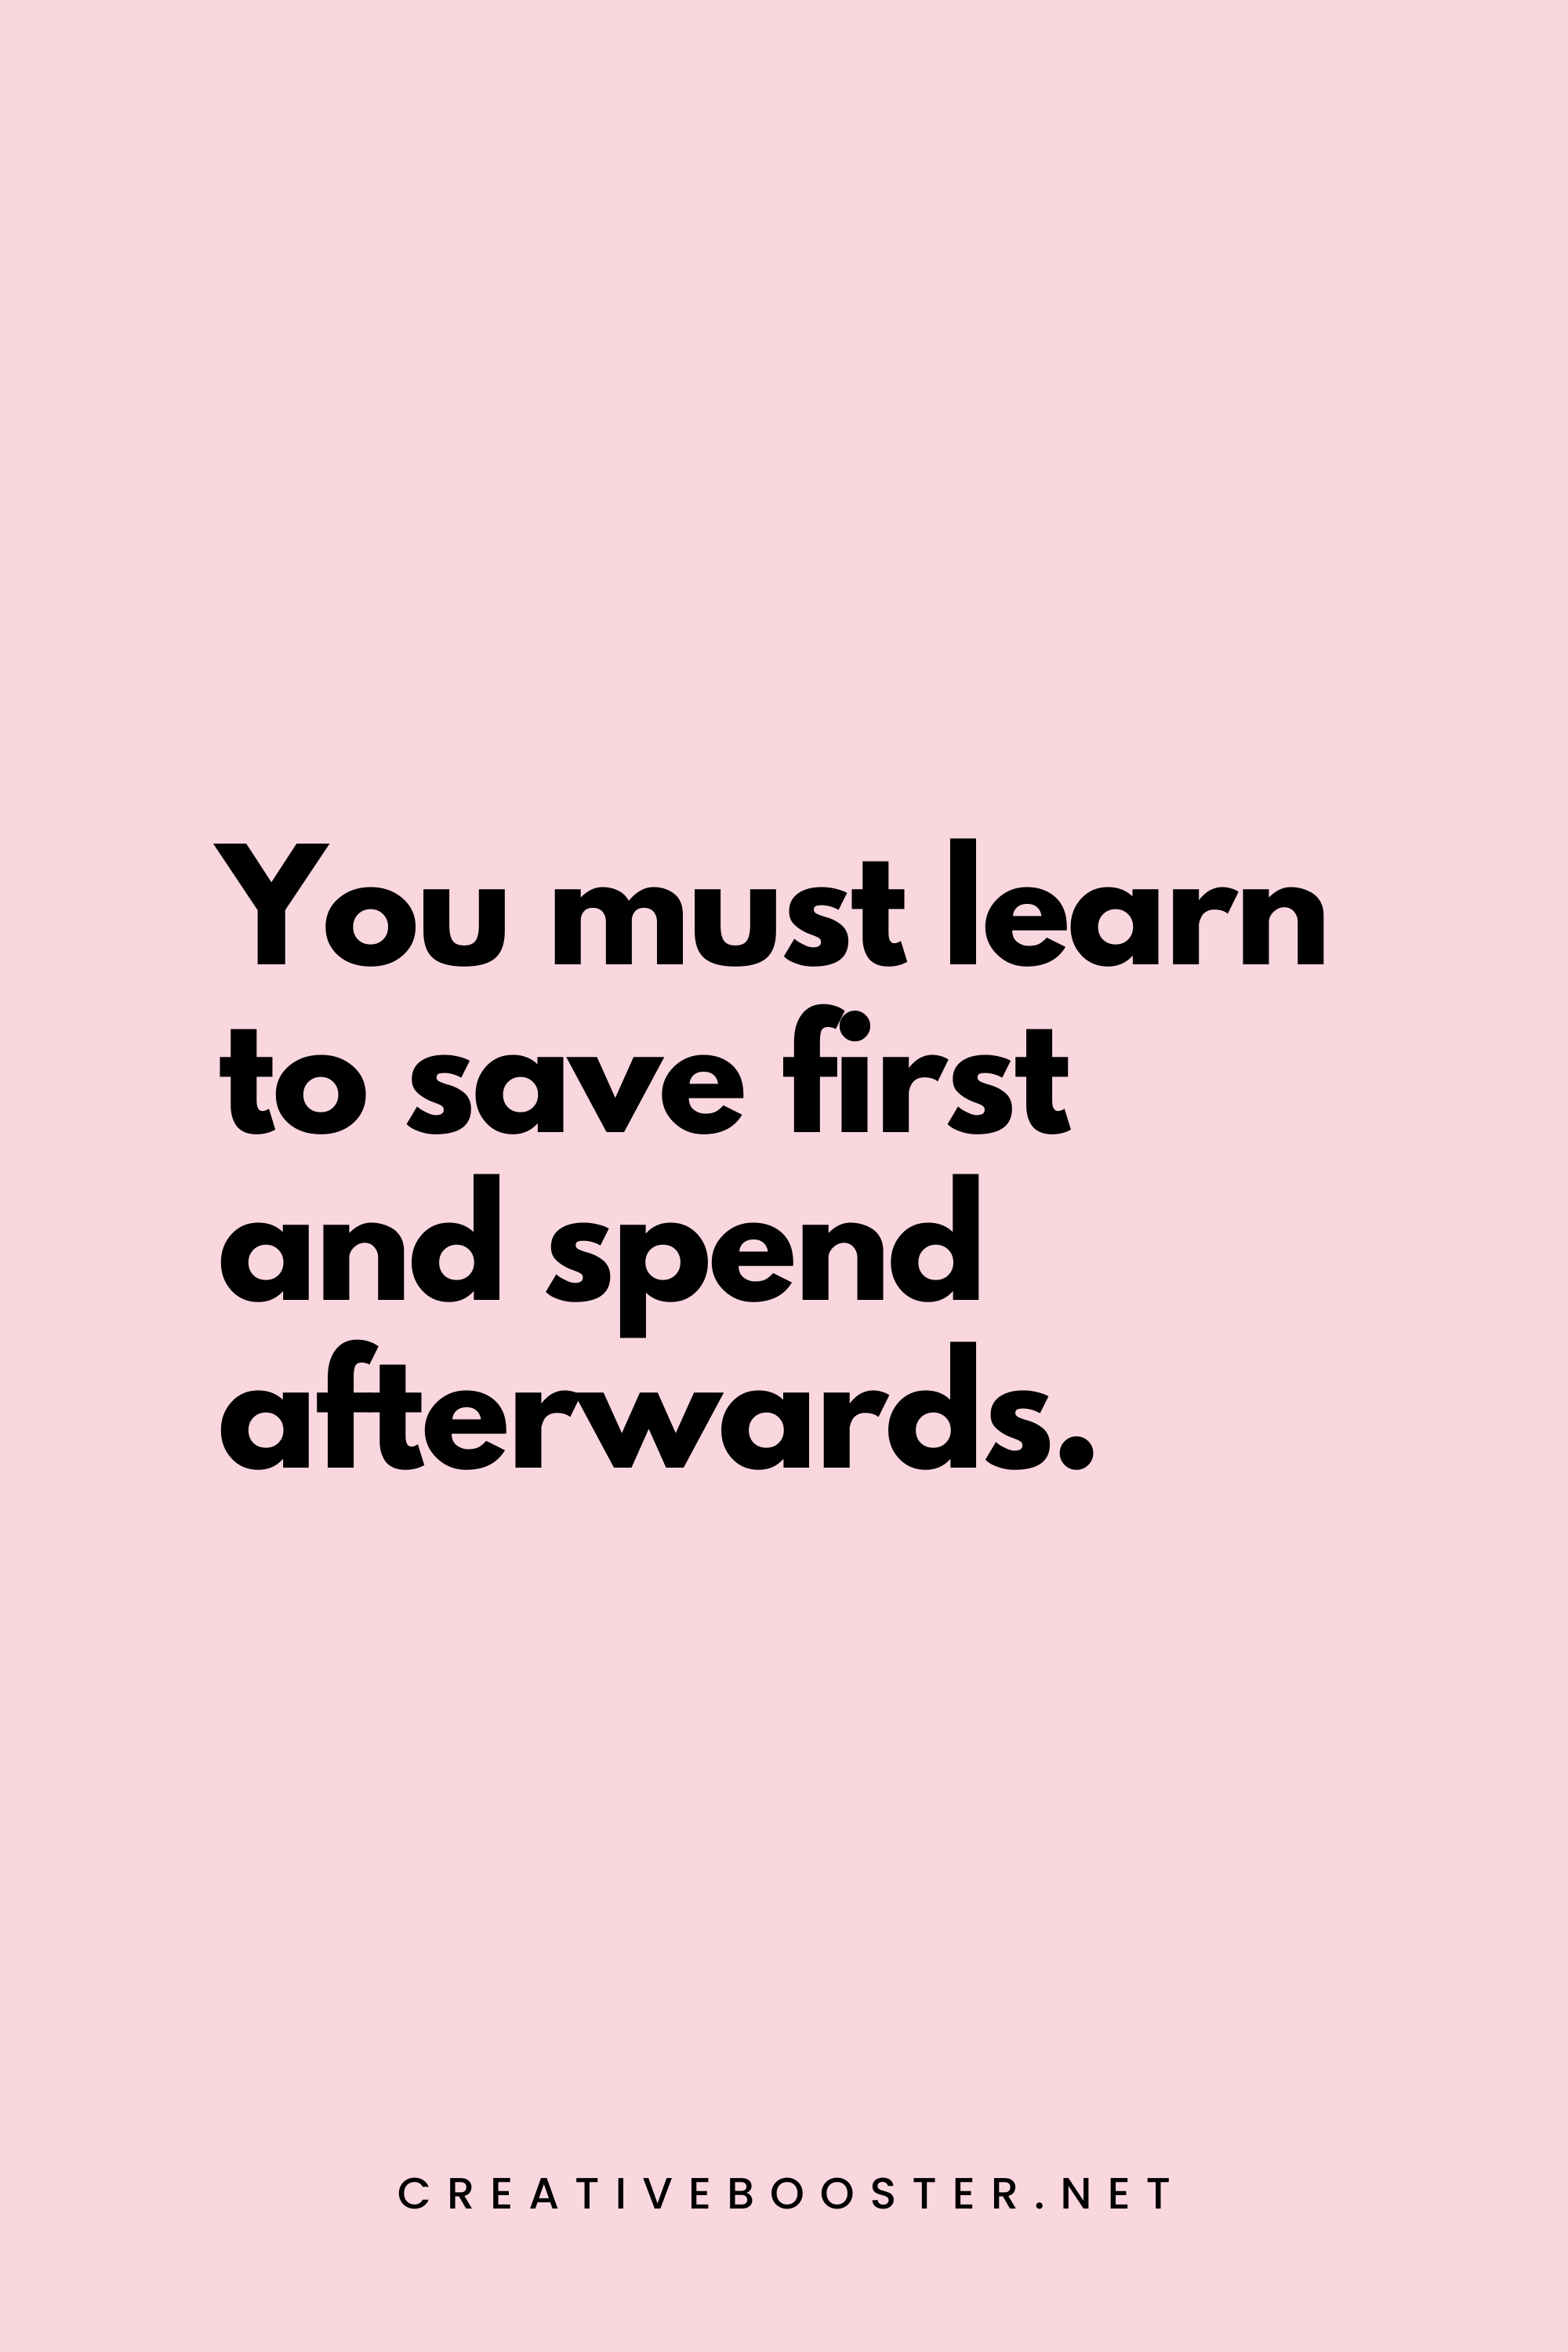 29. You must learn to save first and spend afterwards. - John Poole - 3. Financial Freedom Quotes for Students